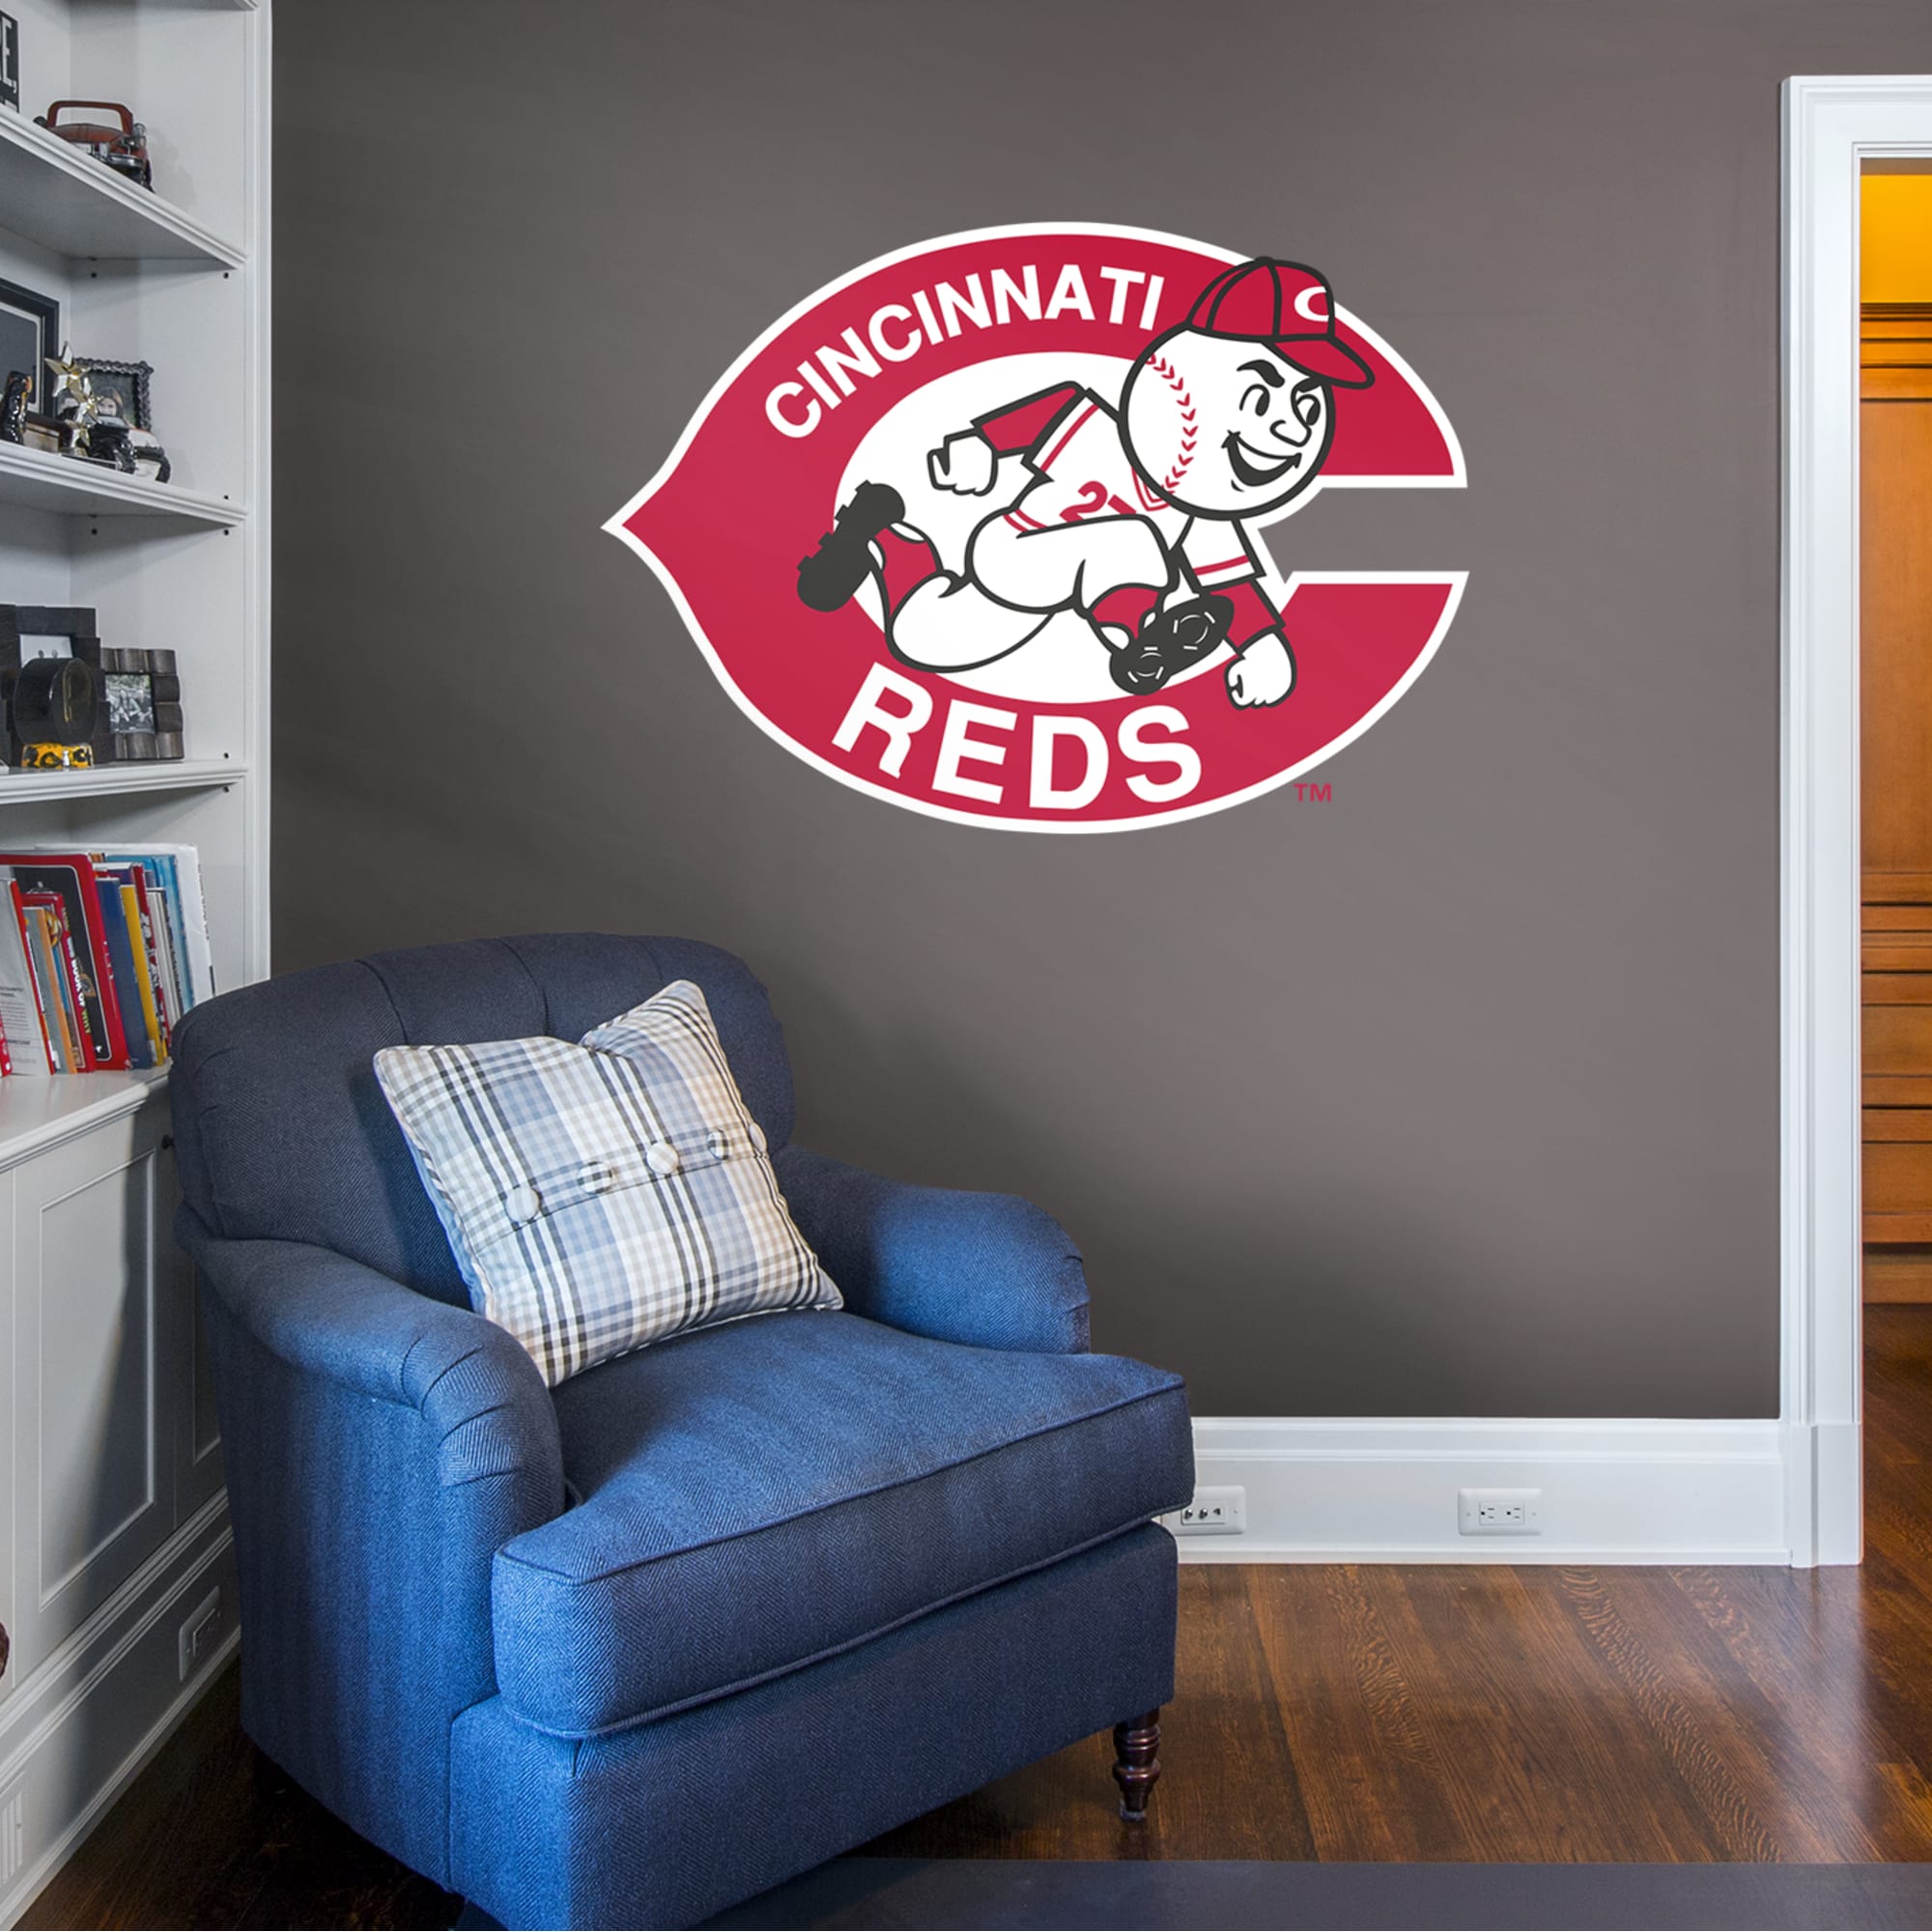 Cincinnati Reds: Classic Logo - Officially Licensed MLB Removable Wall Decal 51.0"W x 36.0"H by Fathead | Vinyl